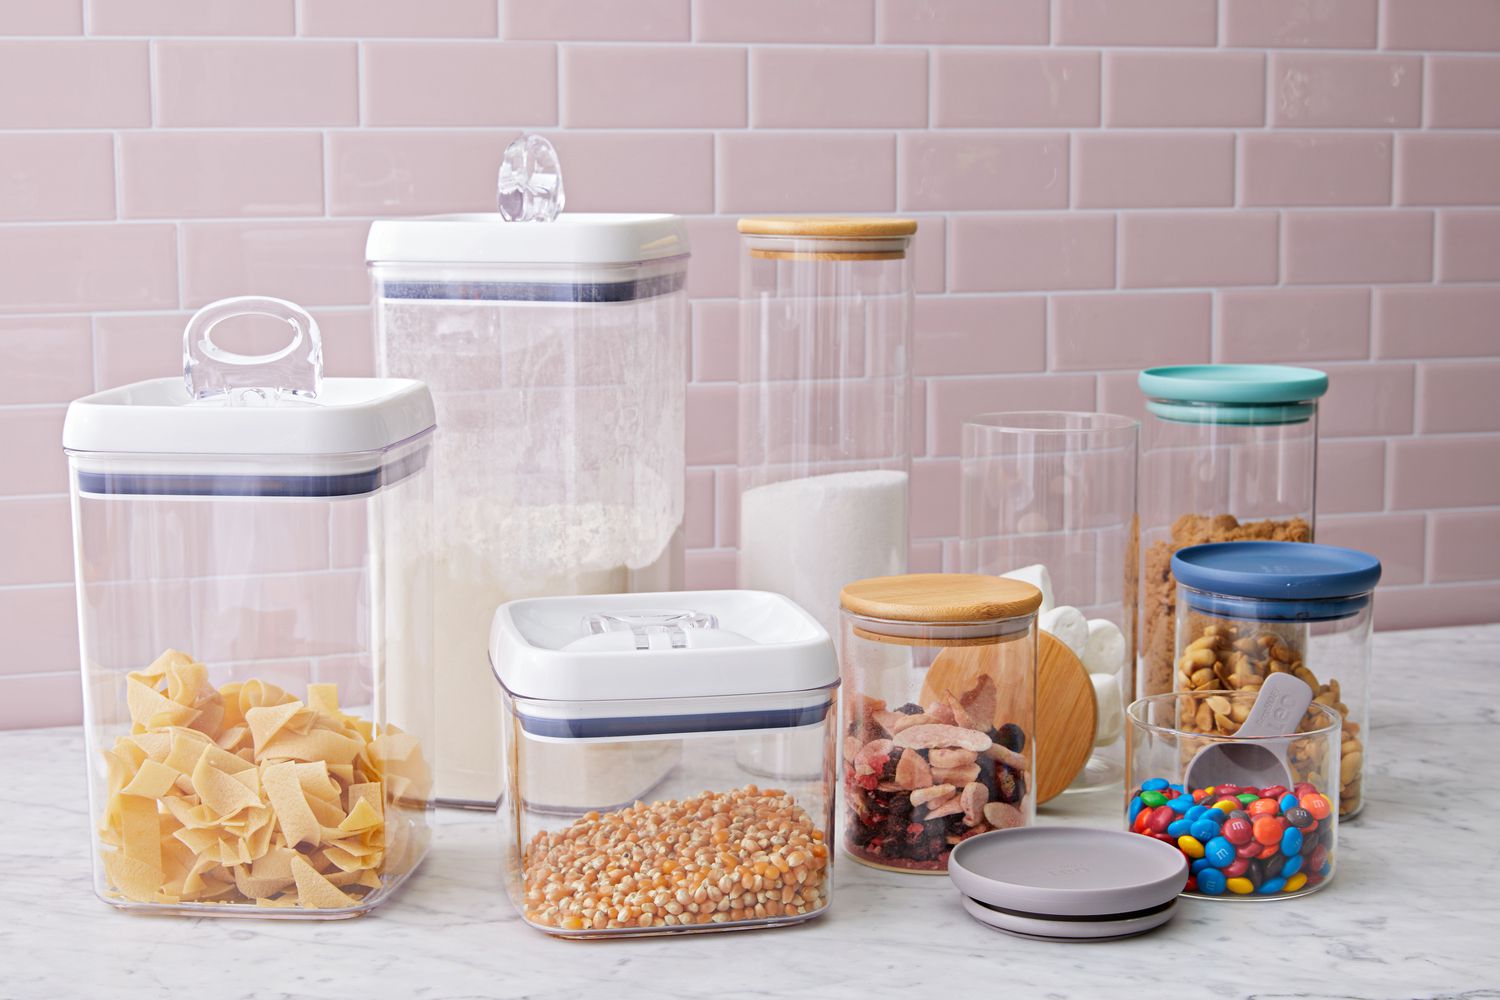 What Makes Food Plastic Containers Popular